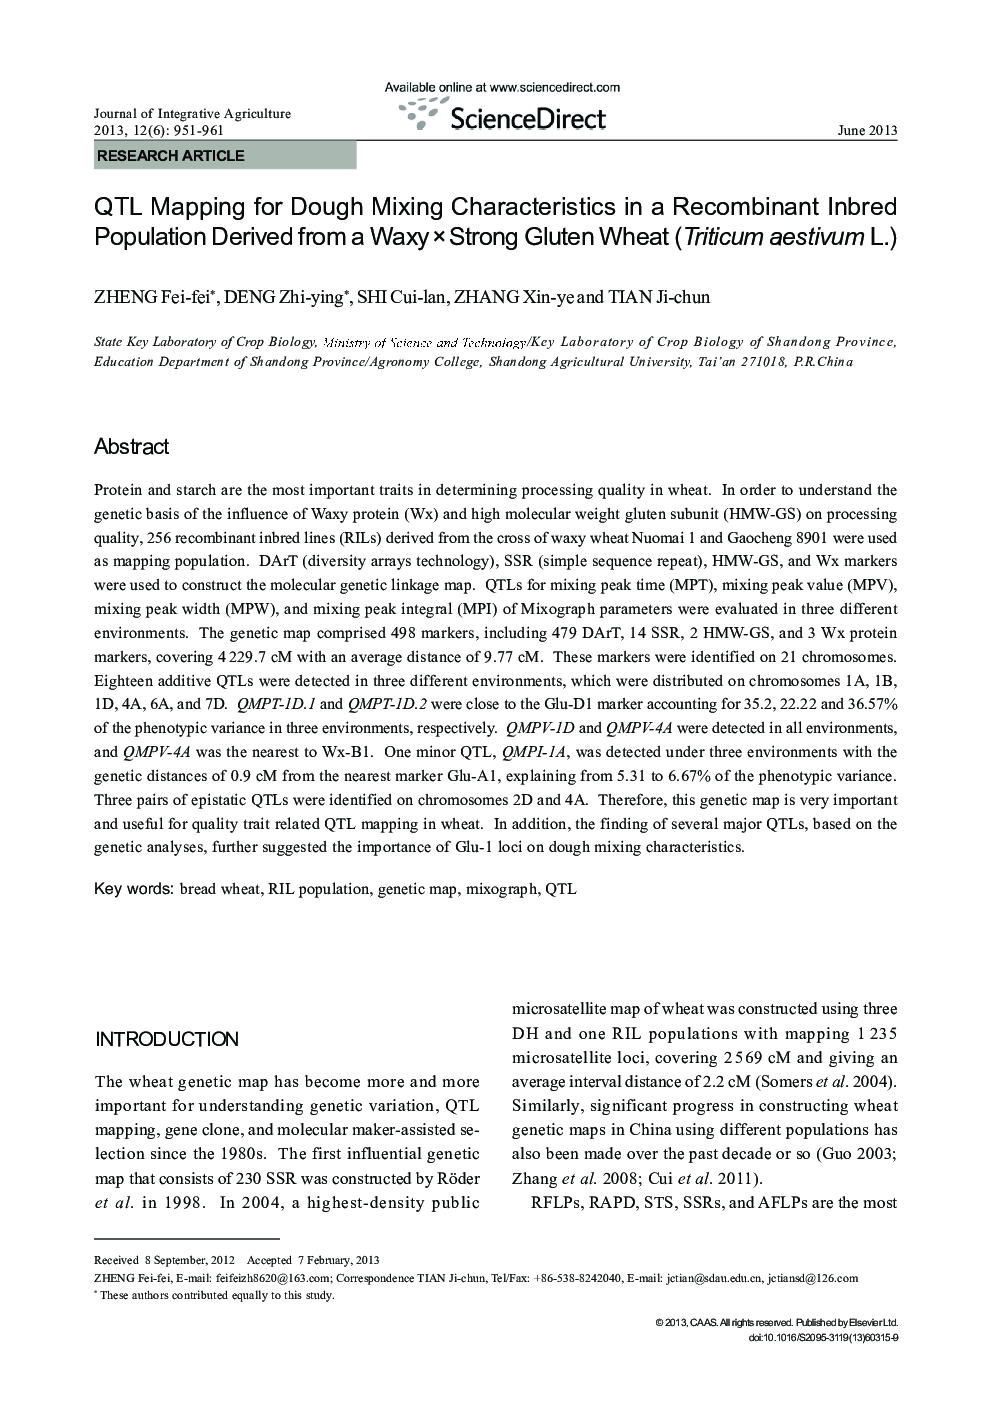 QTL Mapping for Dough Mixing Characteristics in a Recombinant Inbred Population Derived from a Waxy × Strong Gluten Wheat (Triticum aestivum L.)